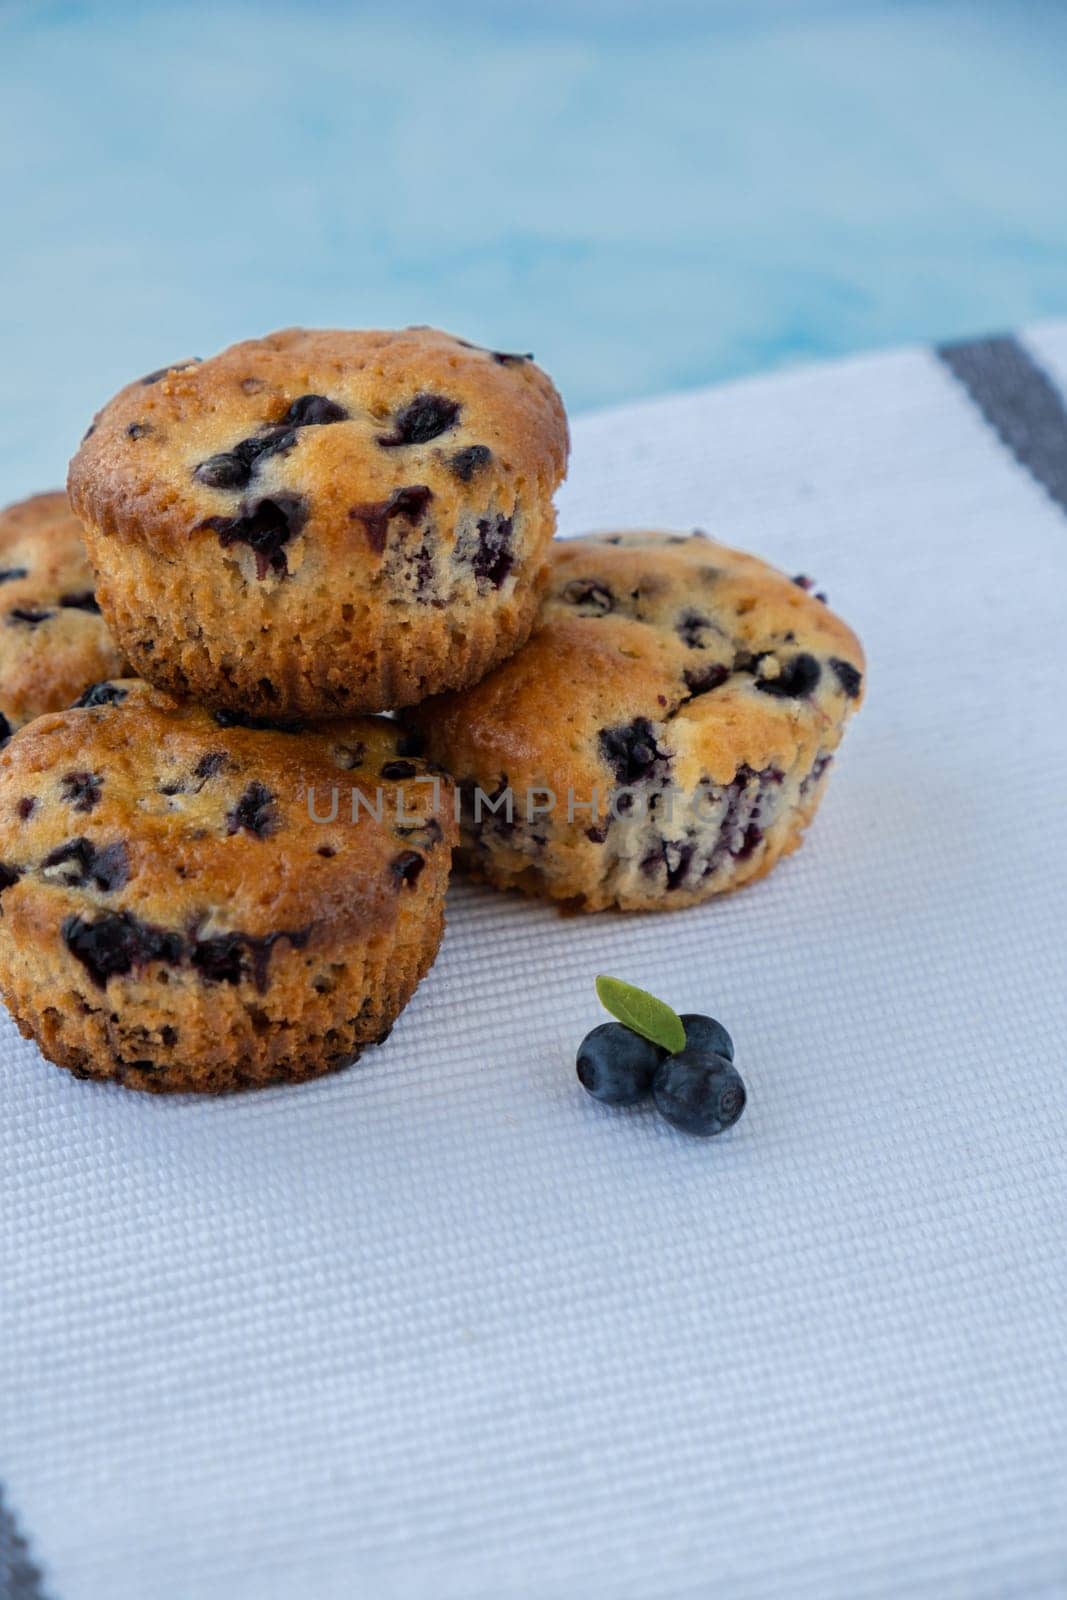 Homemade baked fresh blueberry muffins. Tasty pastry sweet cupcake dessert. Berry pie Healthy vegan cupcakes with organic berries. Gluten free healthcare recipe from alternative flour